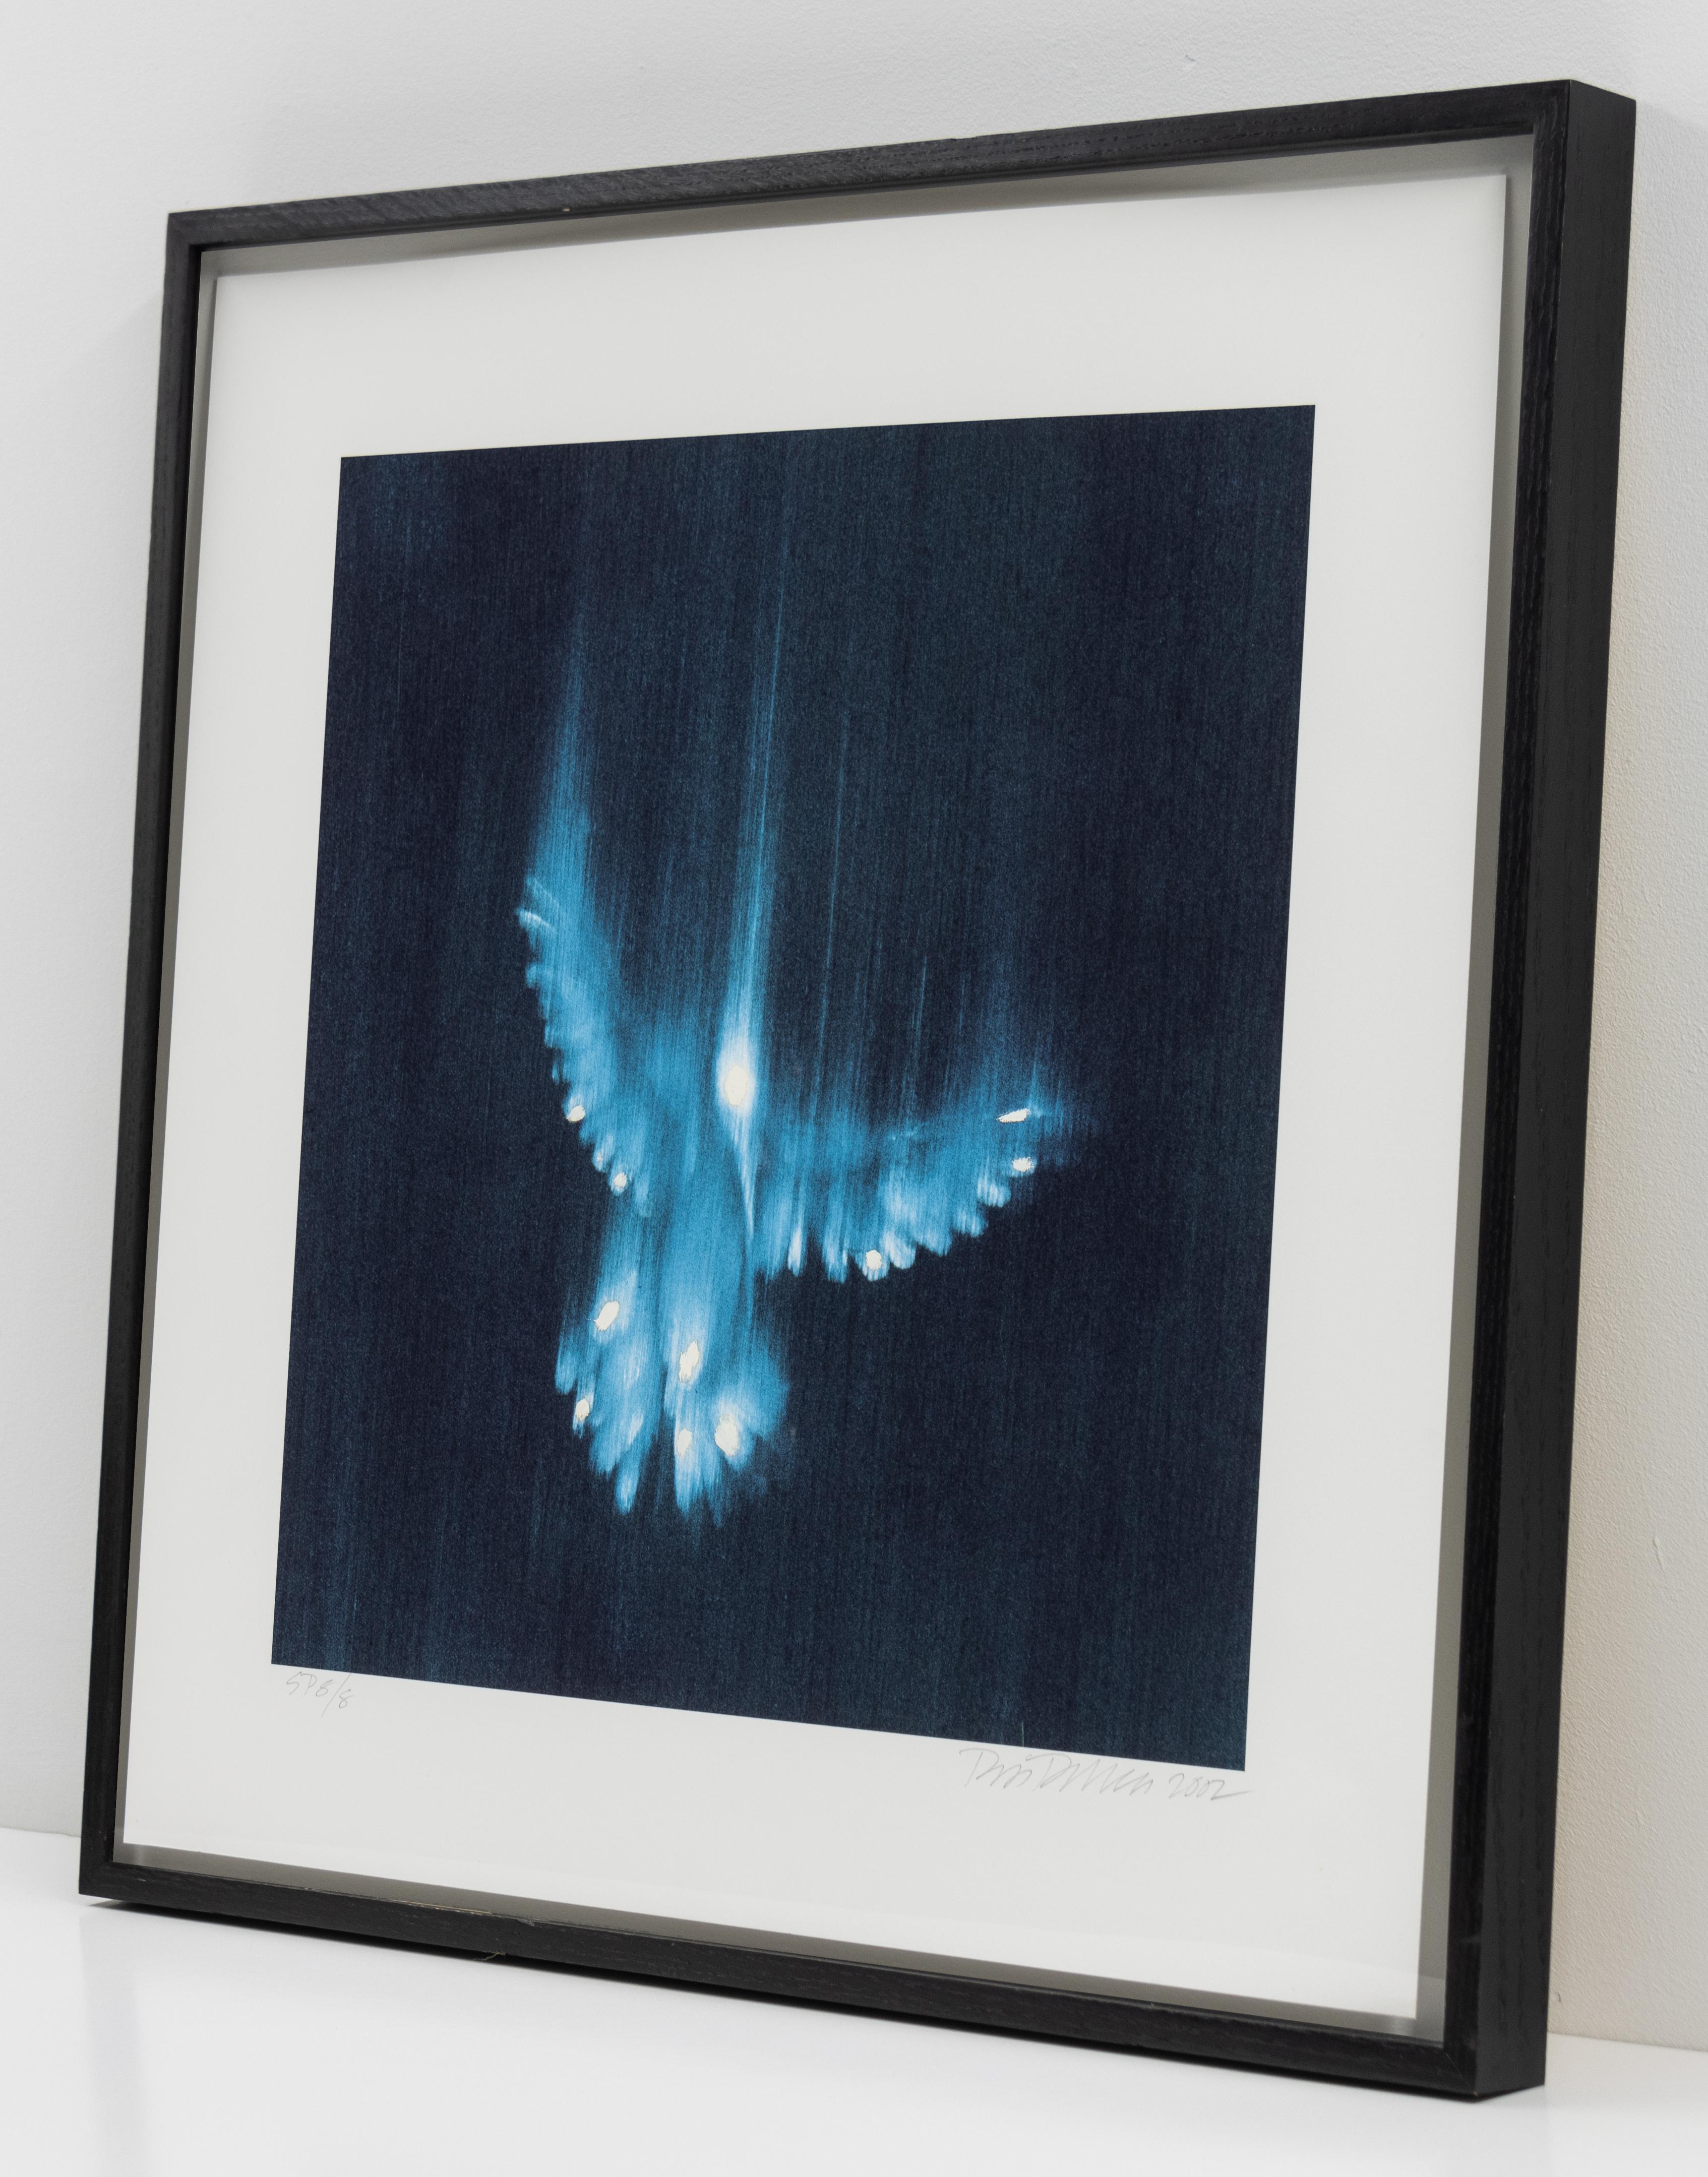 This is a hand-painted digital inkjet print by the artist Ross Bleckner.

The piece presents the blurred image of a falling blue bird.

